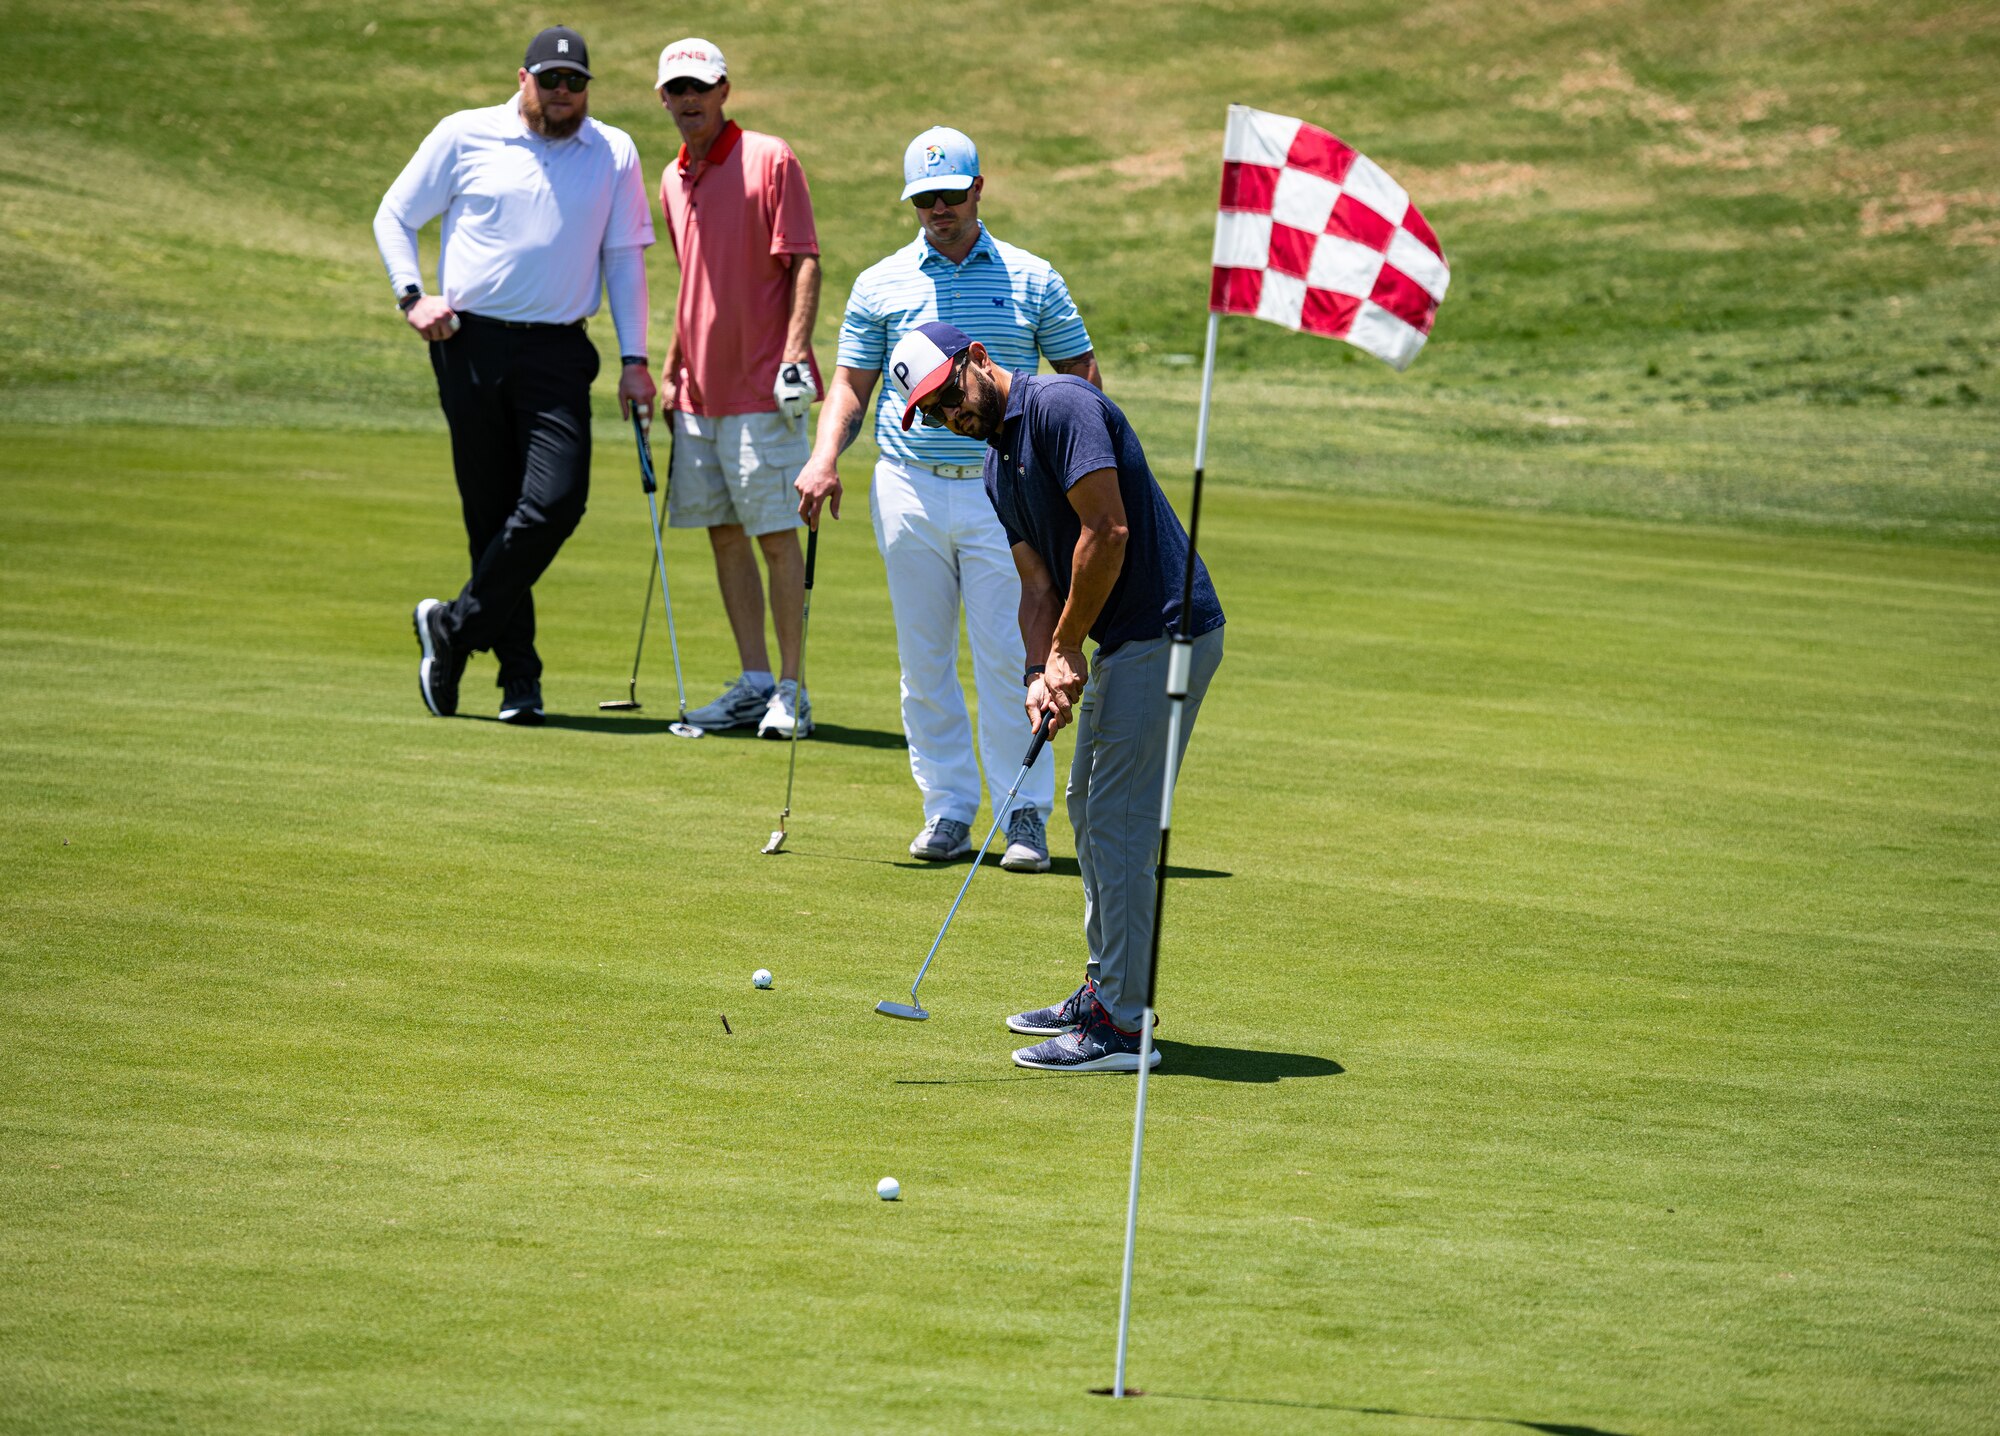 Members of the 56th Security Forces Squadron participate in the annual Police Week Golf Tournament, May 10, 2021, at Luke Air Force Base, Arizona.